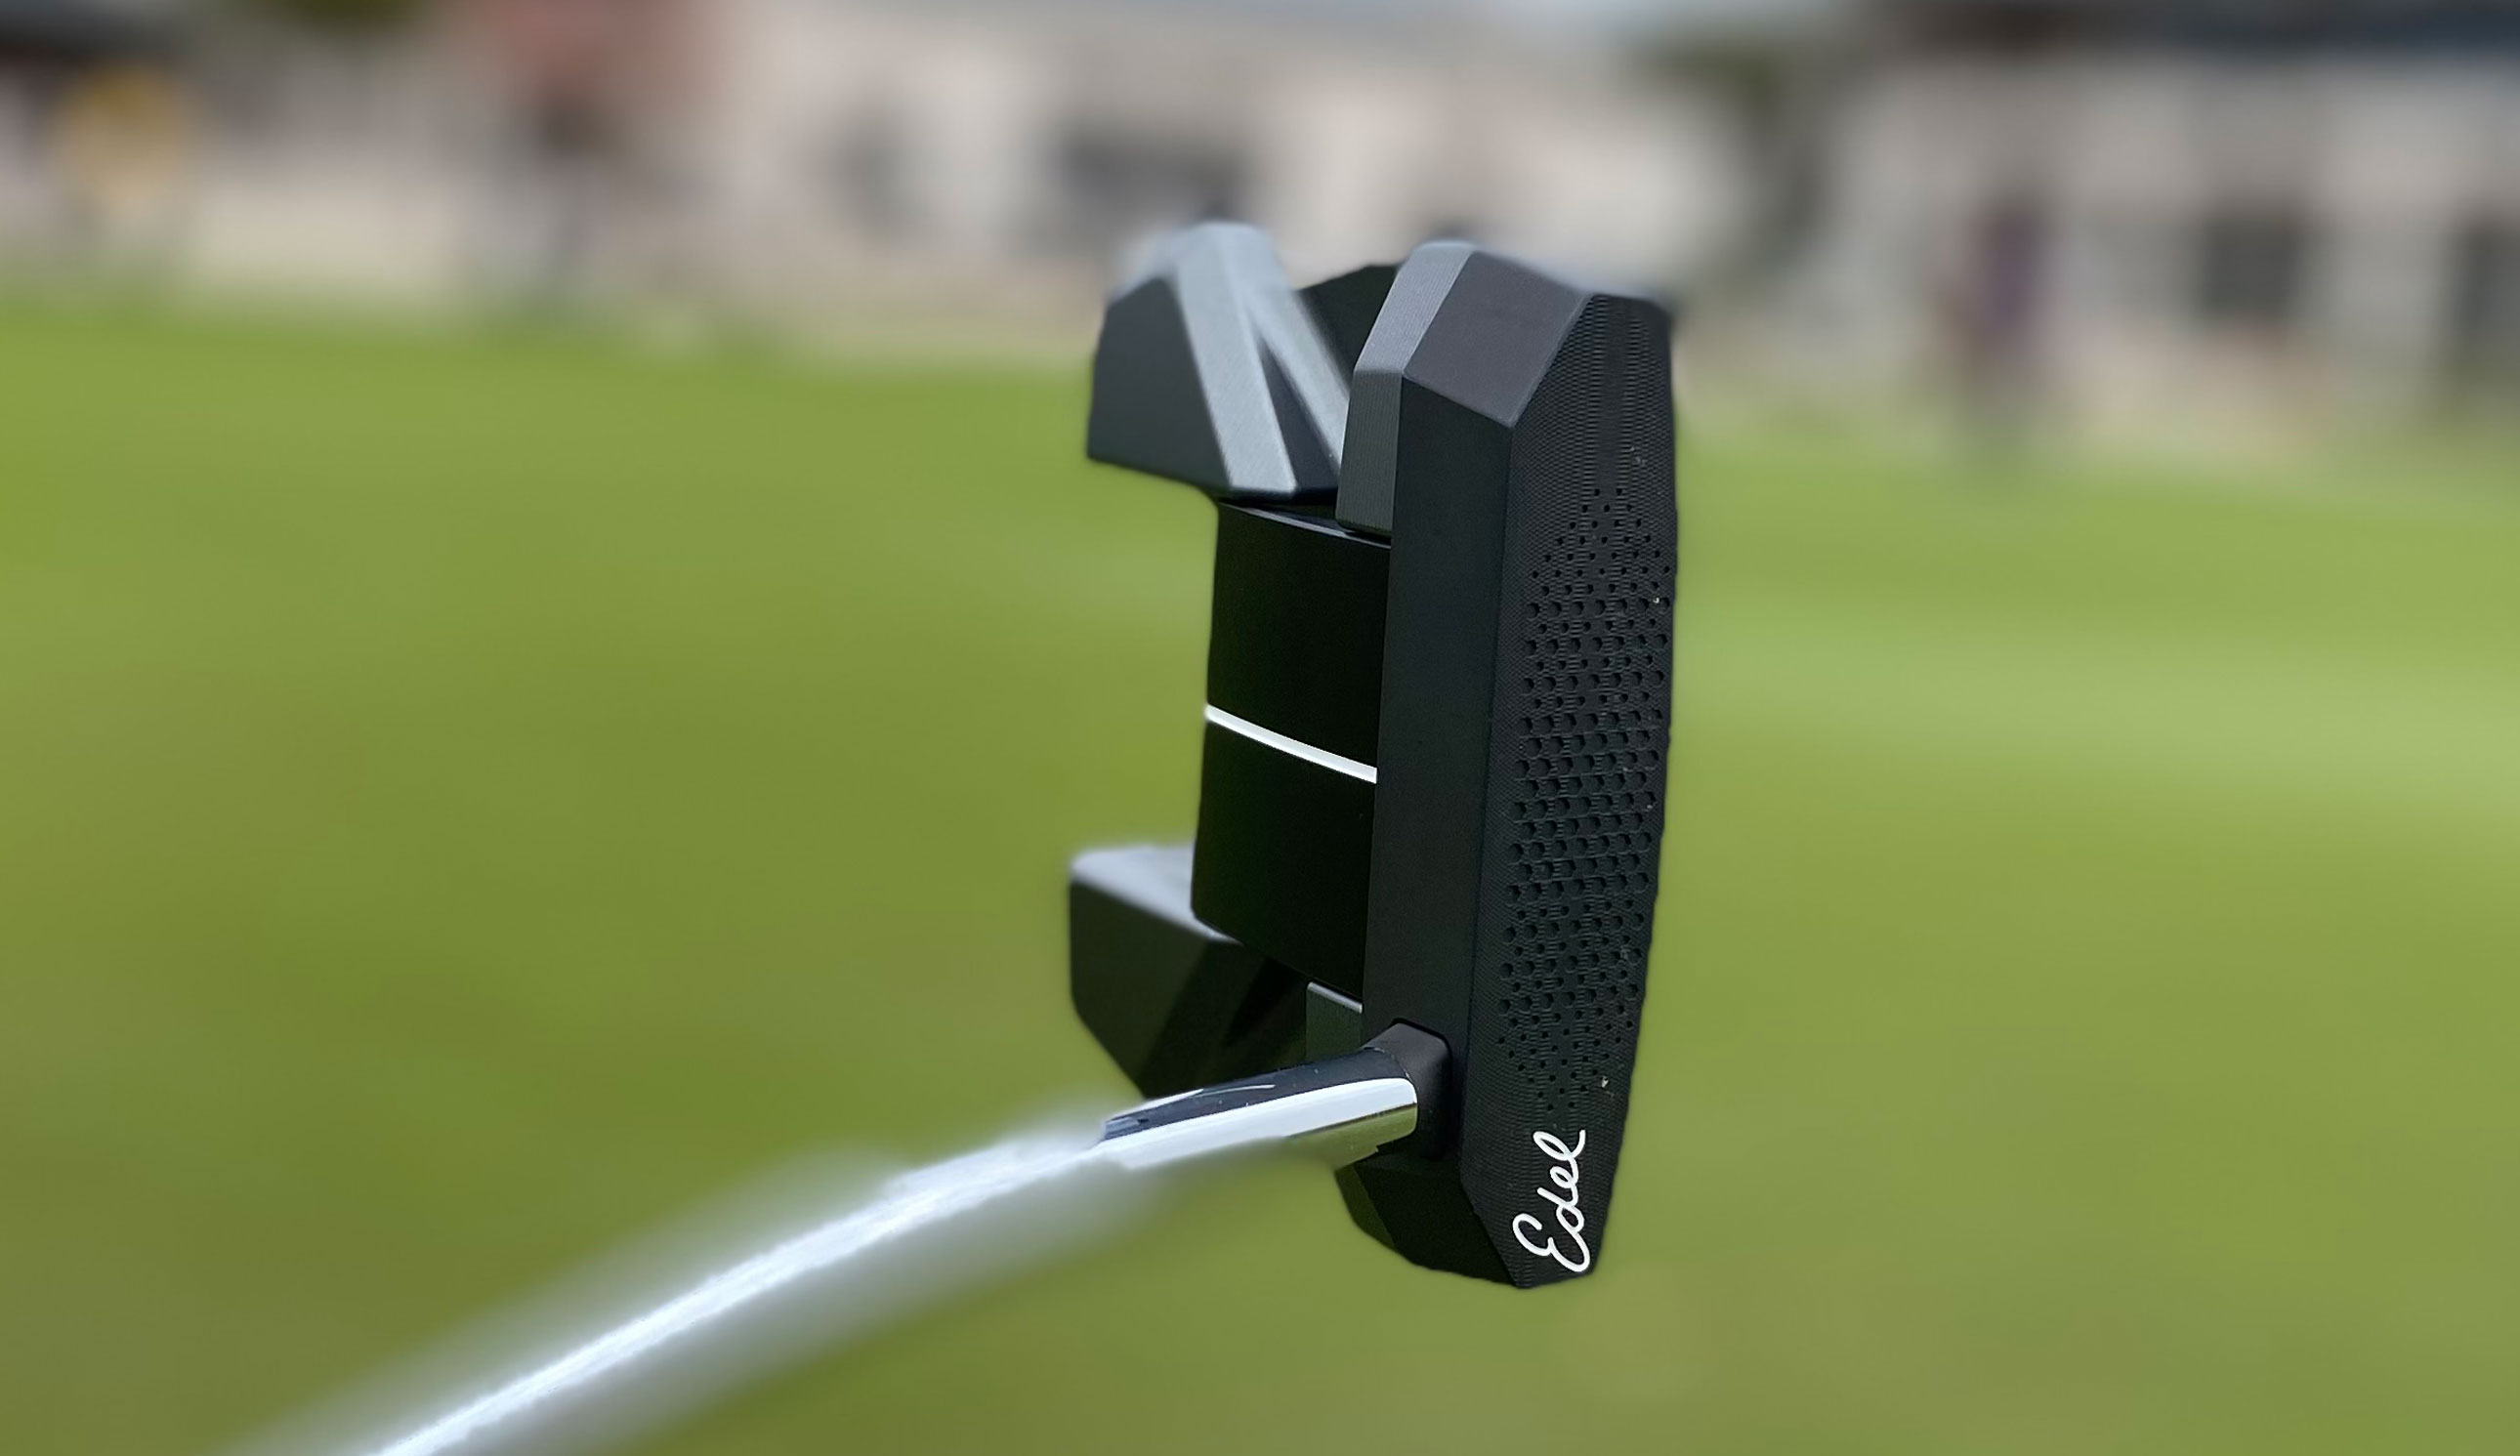 The face of the Edel Golf Array F-1 Putter